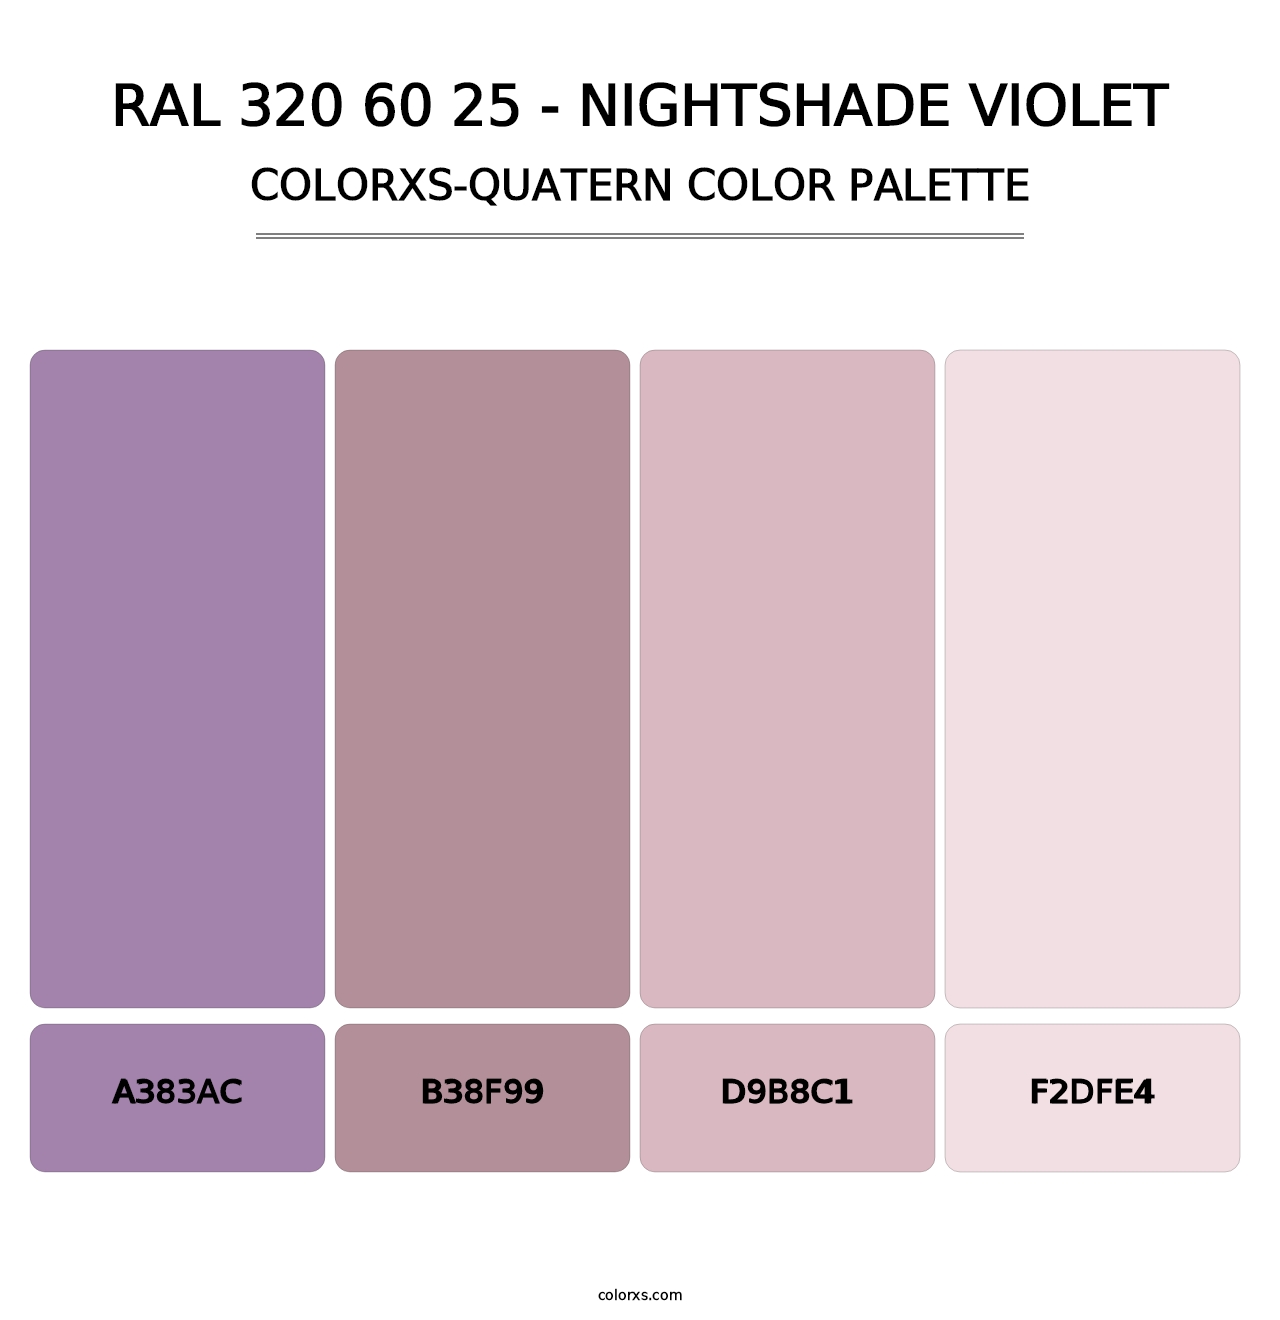 RAL 320 60 25 - Nightshade Violet - Colorxs Quatern Palette